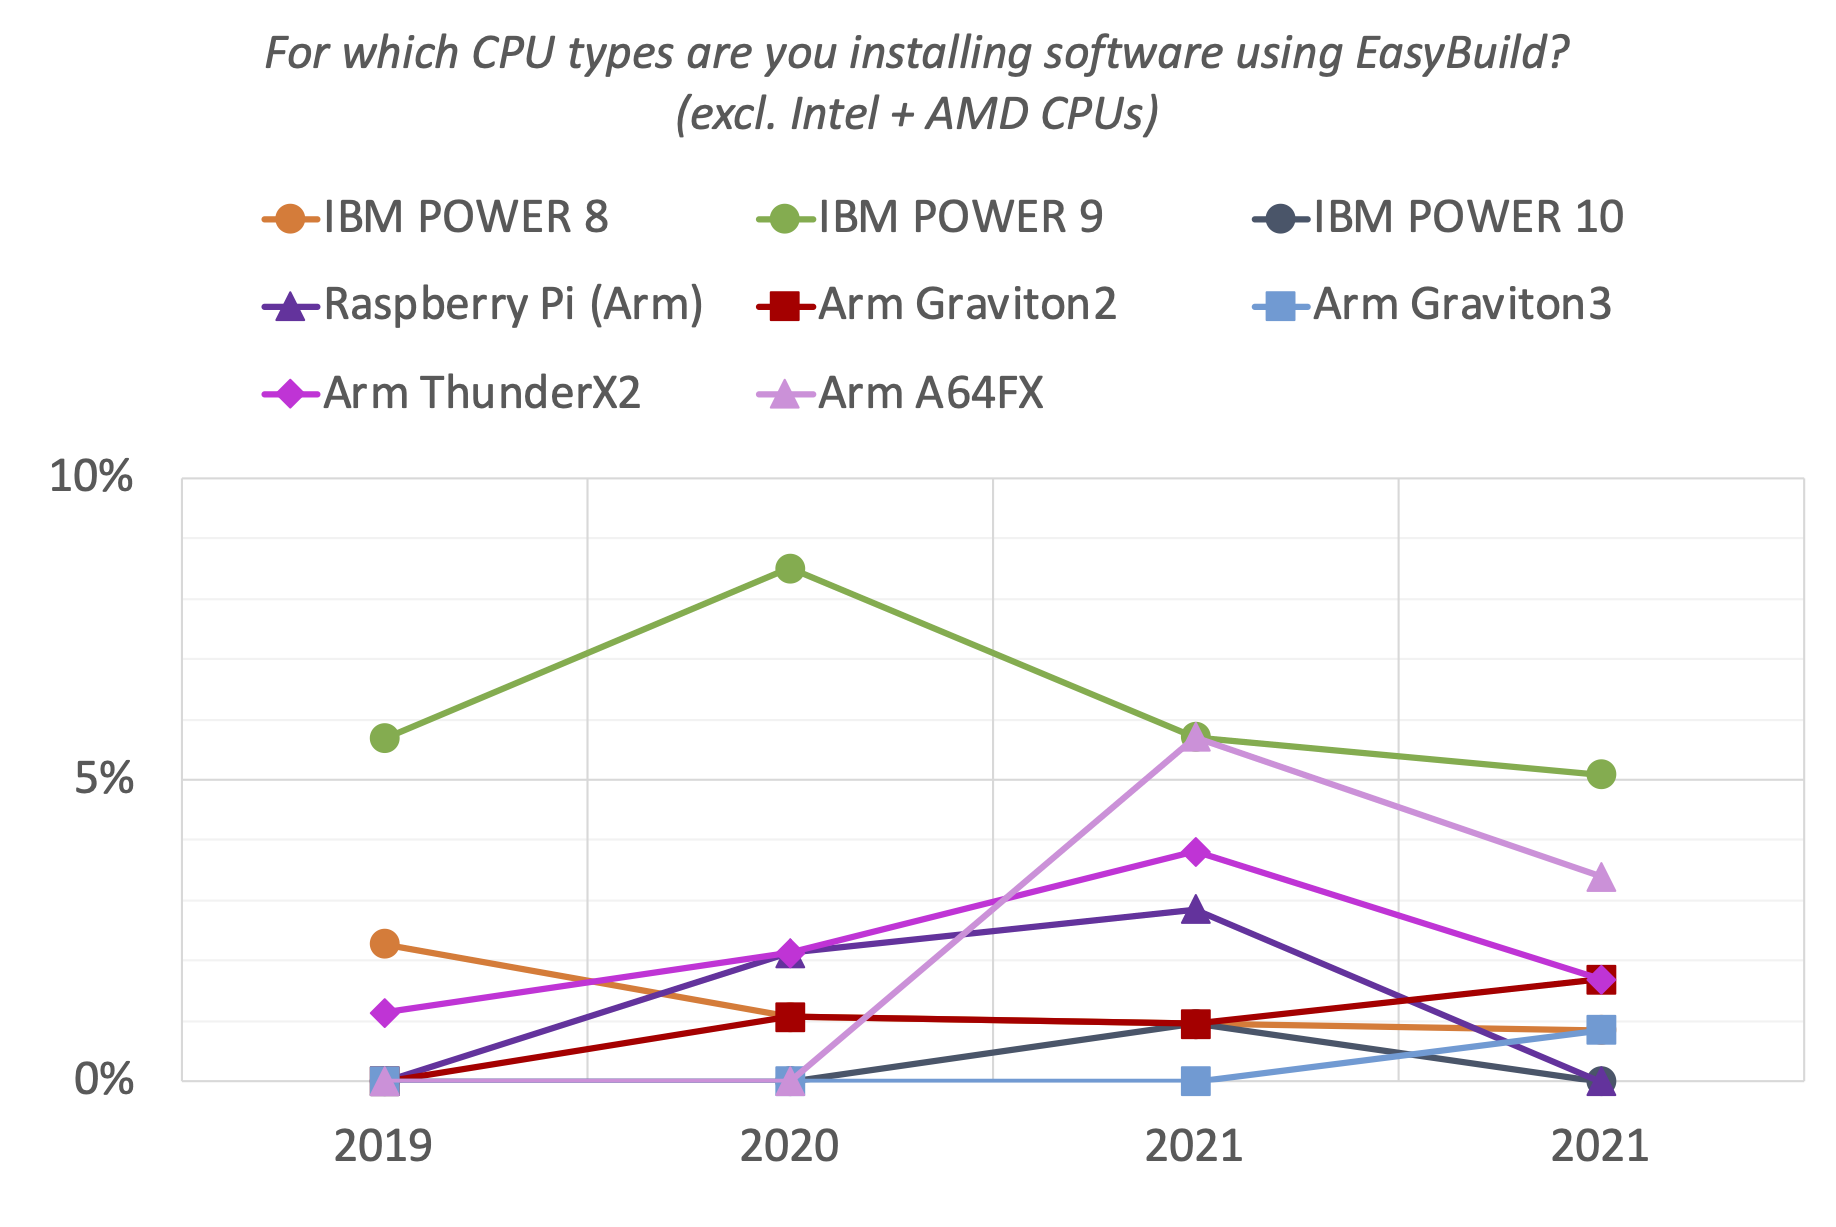 13. For which CPU types are you installing software using EasyBuild? (non Intel/AMD)